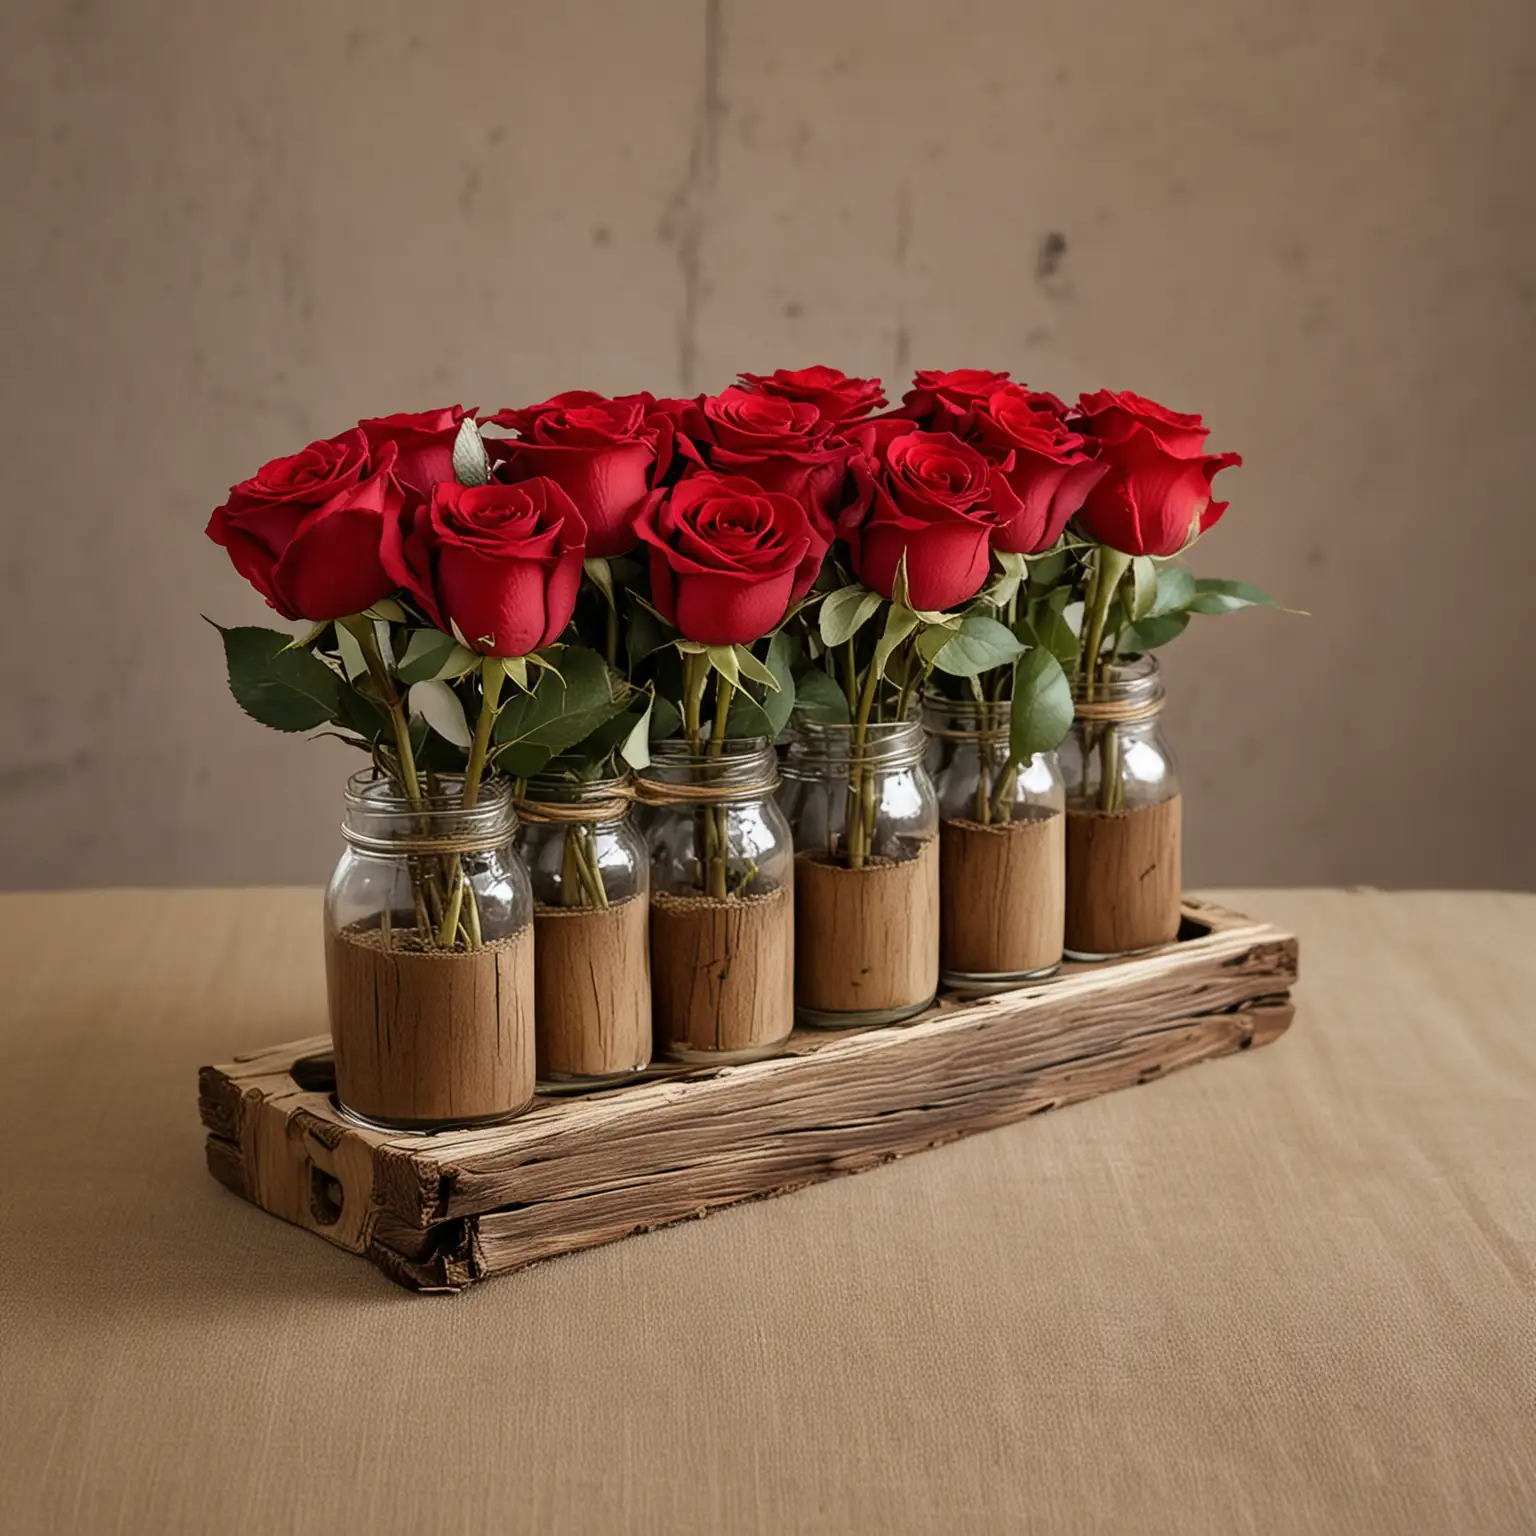 simple and unique rustic wedding centerpiece with red roses